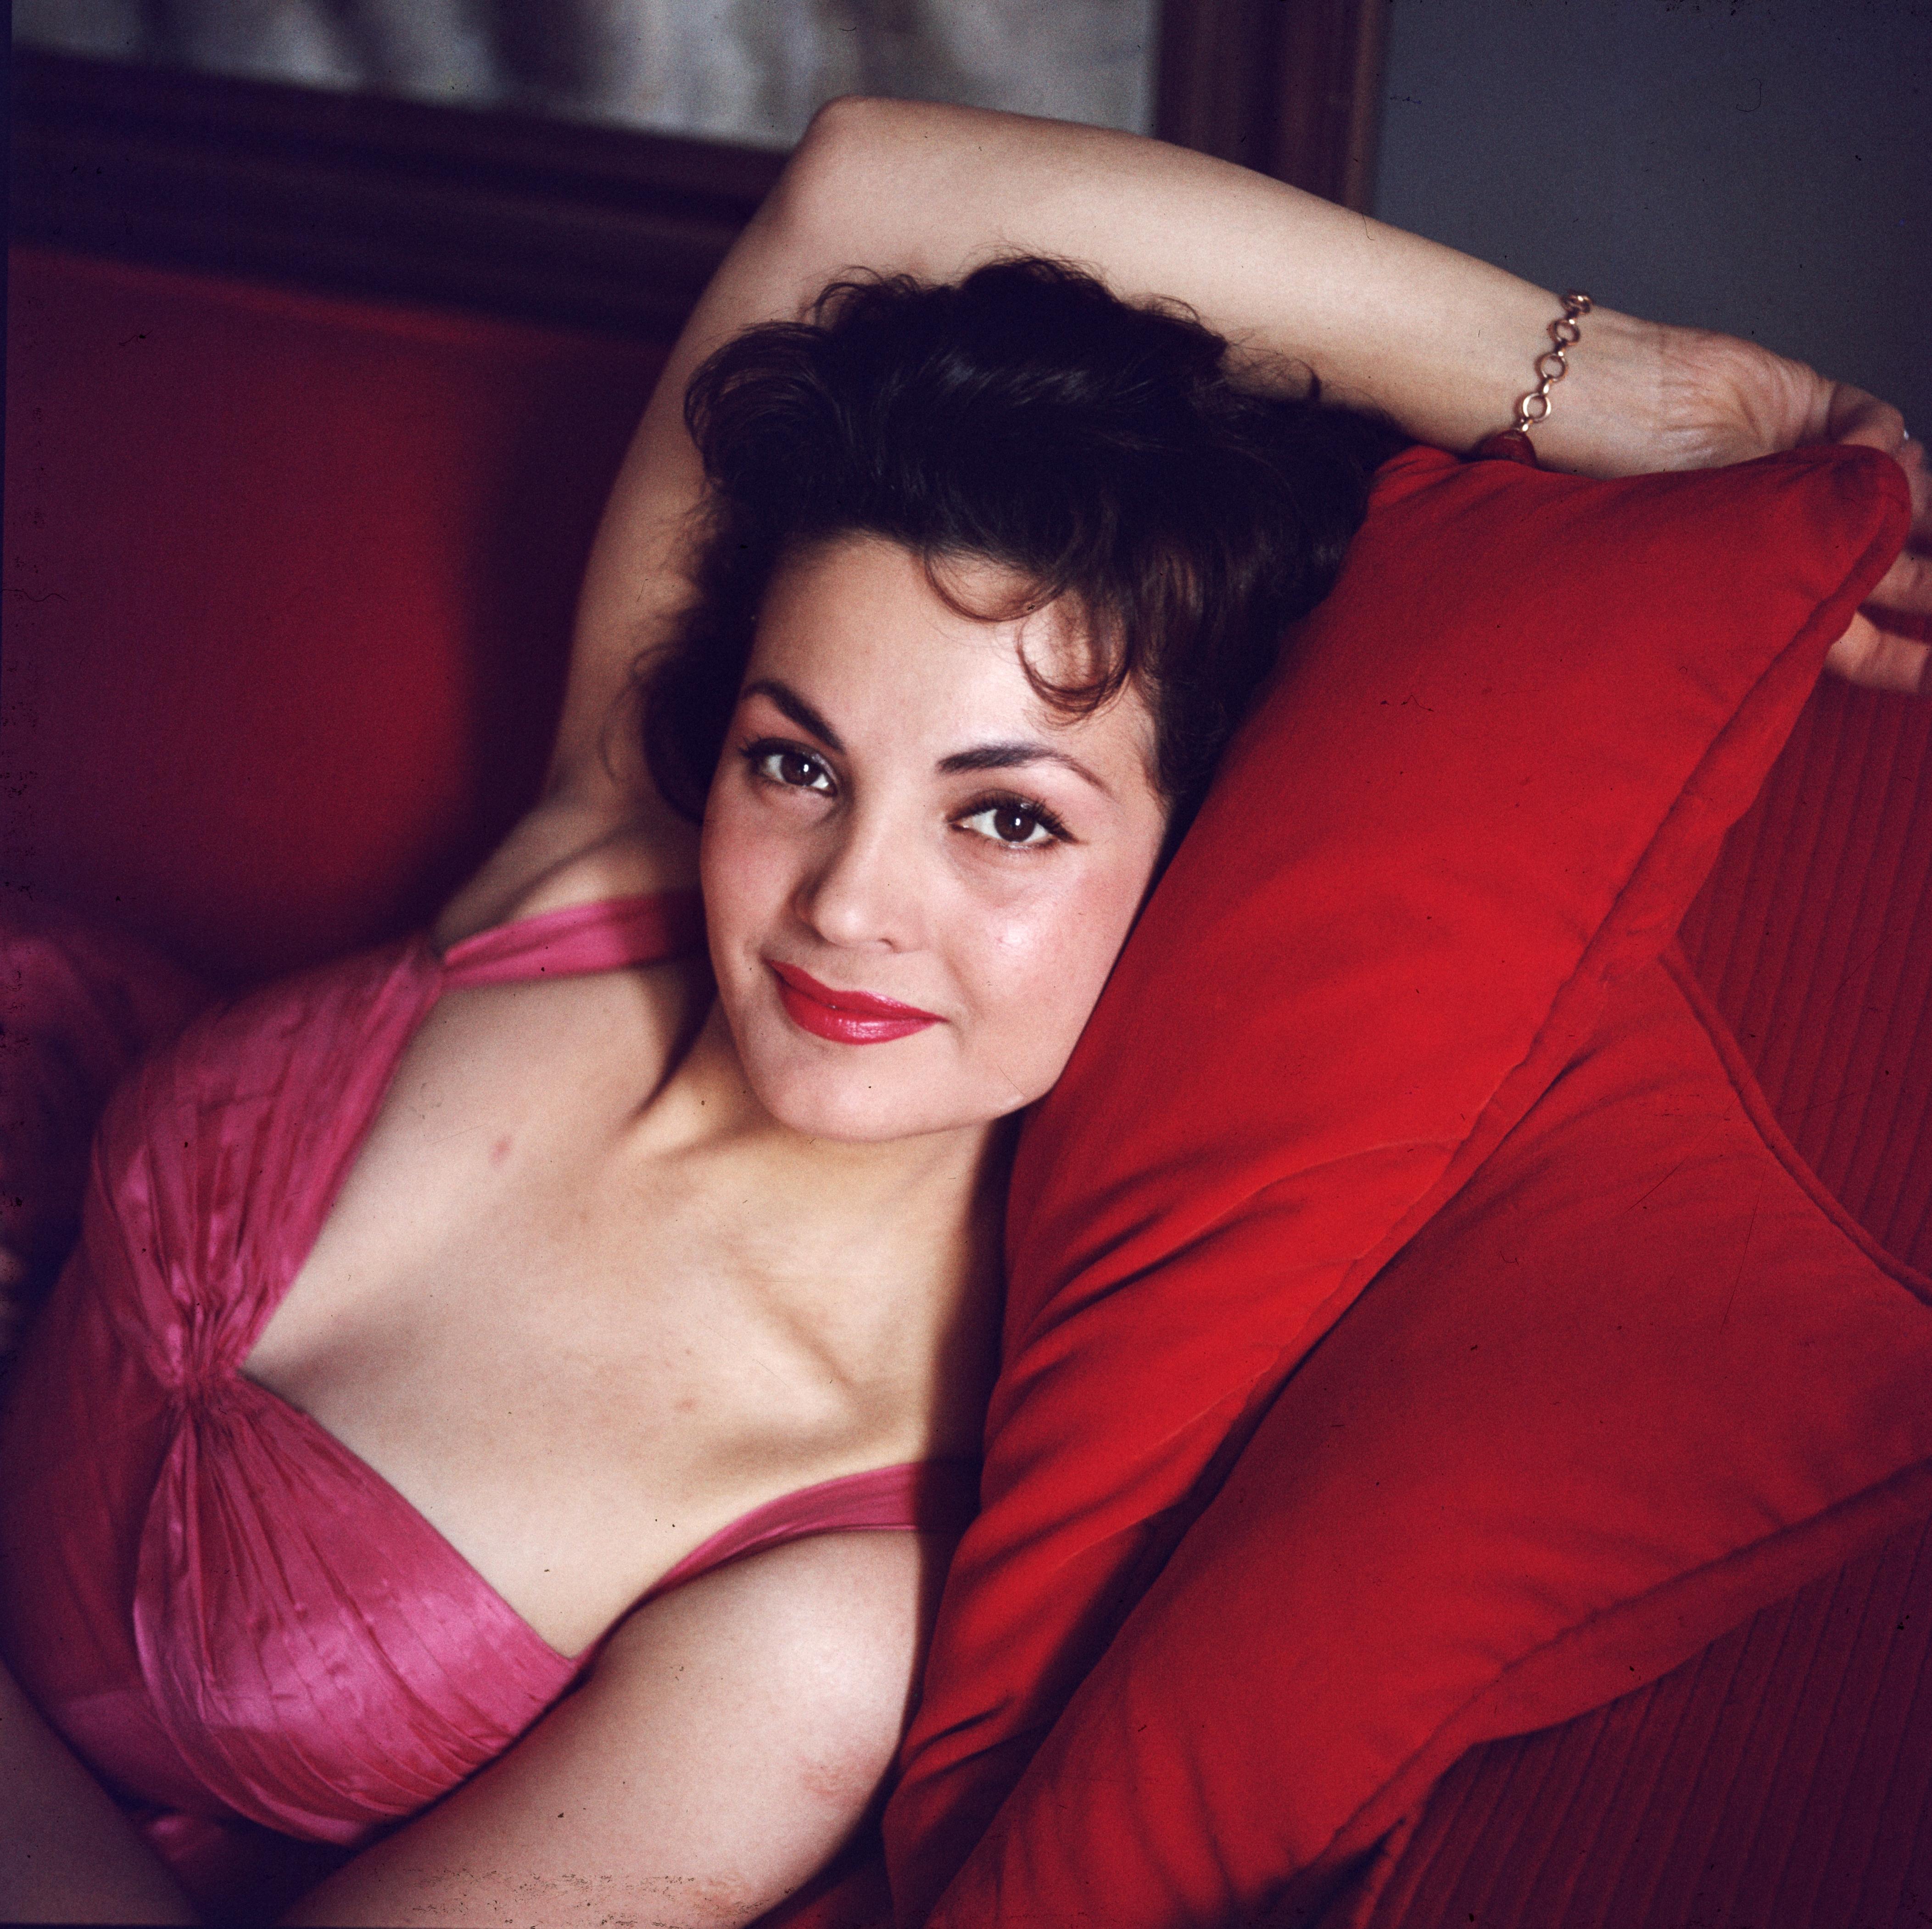 Spanish actress and singer Carmen Sevilla. (Photo by Slim Aarons/Getty Images)

Slim Aarons
Carmen Sevilla
Chromogenic Lambda print
1957, Printed Later
Slim Aarons Estate Edition
Complimentary dealer shipping to your framer, worldwide.
Stamped and